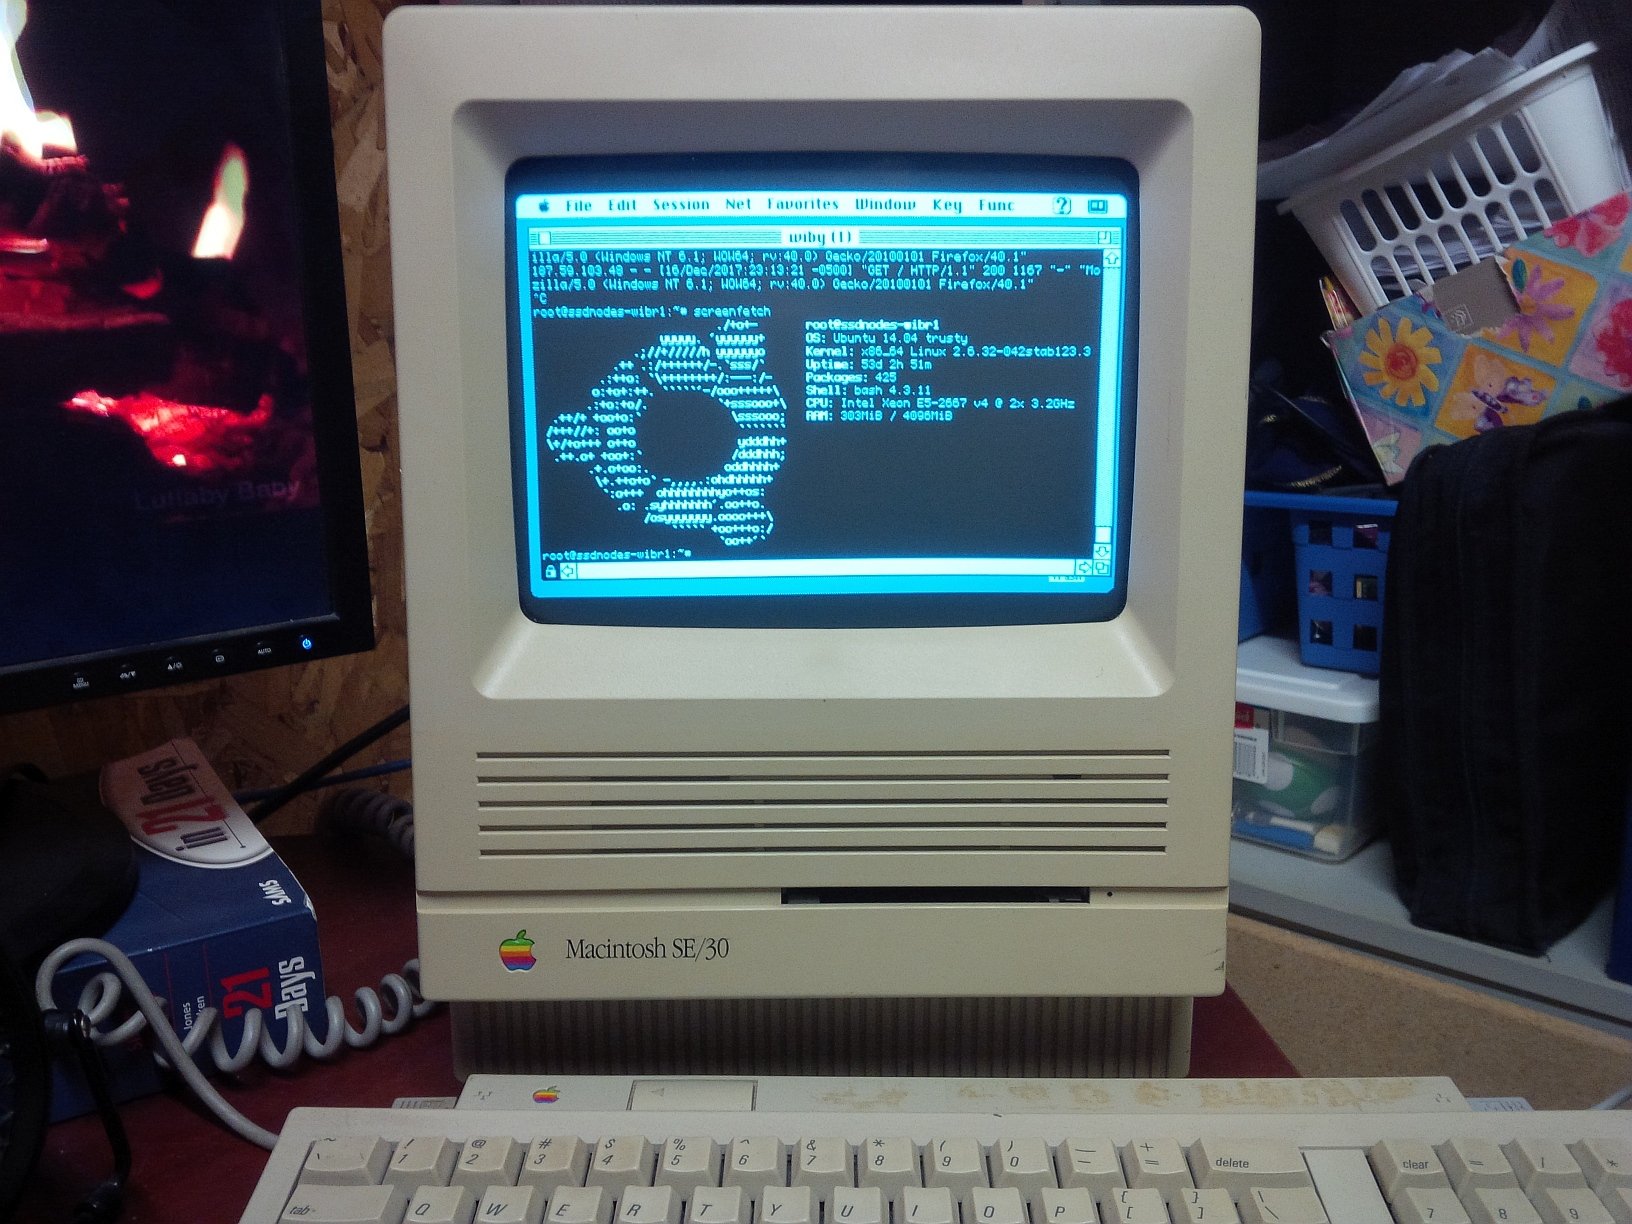 Some cool footage and images of old operating systems ...